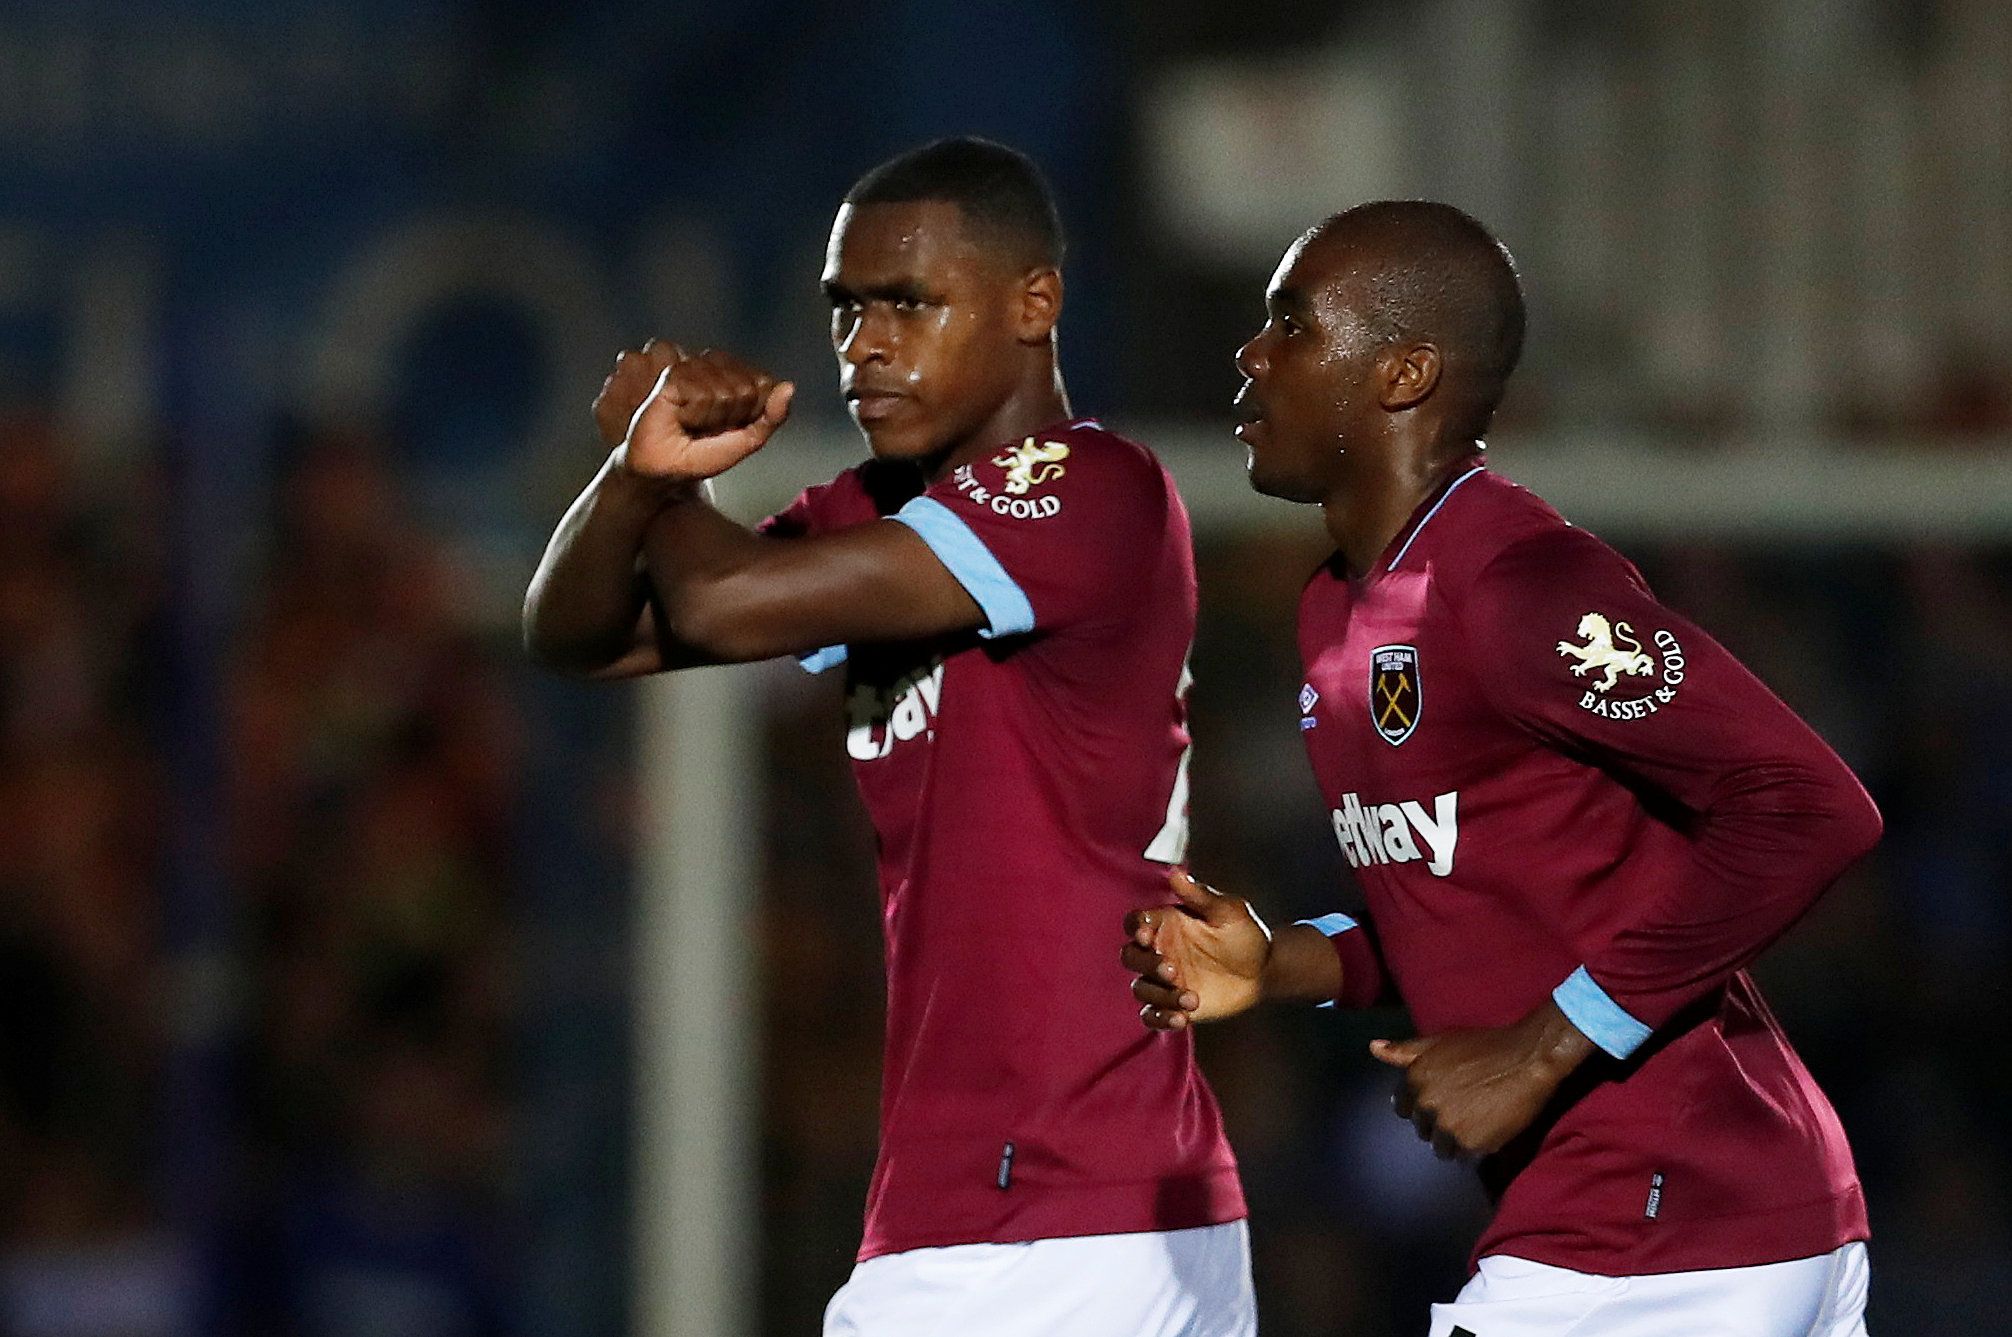 Soccer Football - Carabao Cup Second Round - AFC Wimbledon v West Ham United - The Cherry Red Records Stadium, London, Britain - August 28, 2018  West Ham's Issa Diop celebrates scoring their first goal   Action Images via Reuters/Matthew Childs  EDITORIAL USE ONLY. No use with unauthorized audio, video, data, fixture lists, club/league logos or 